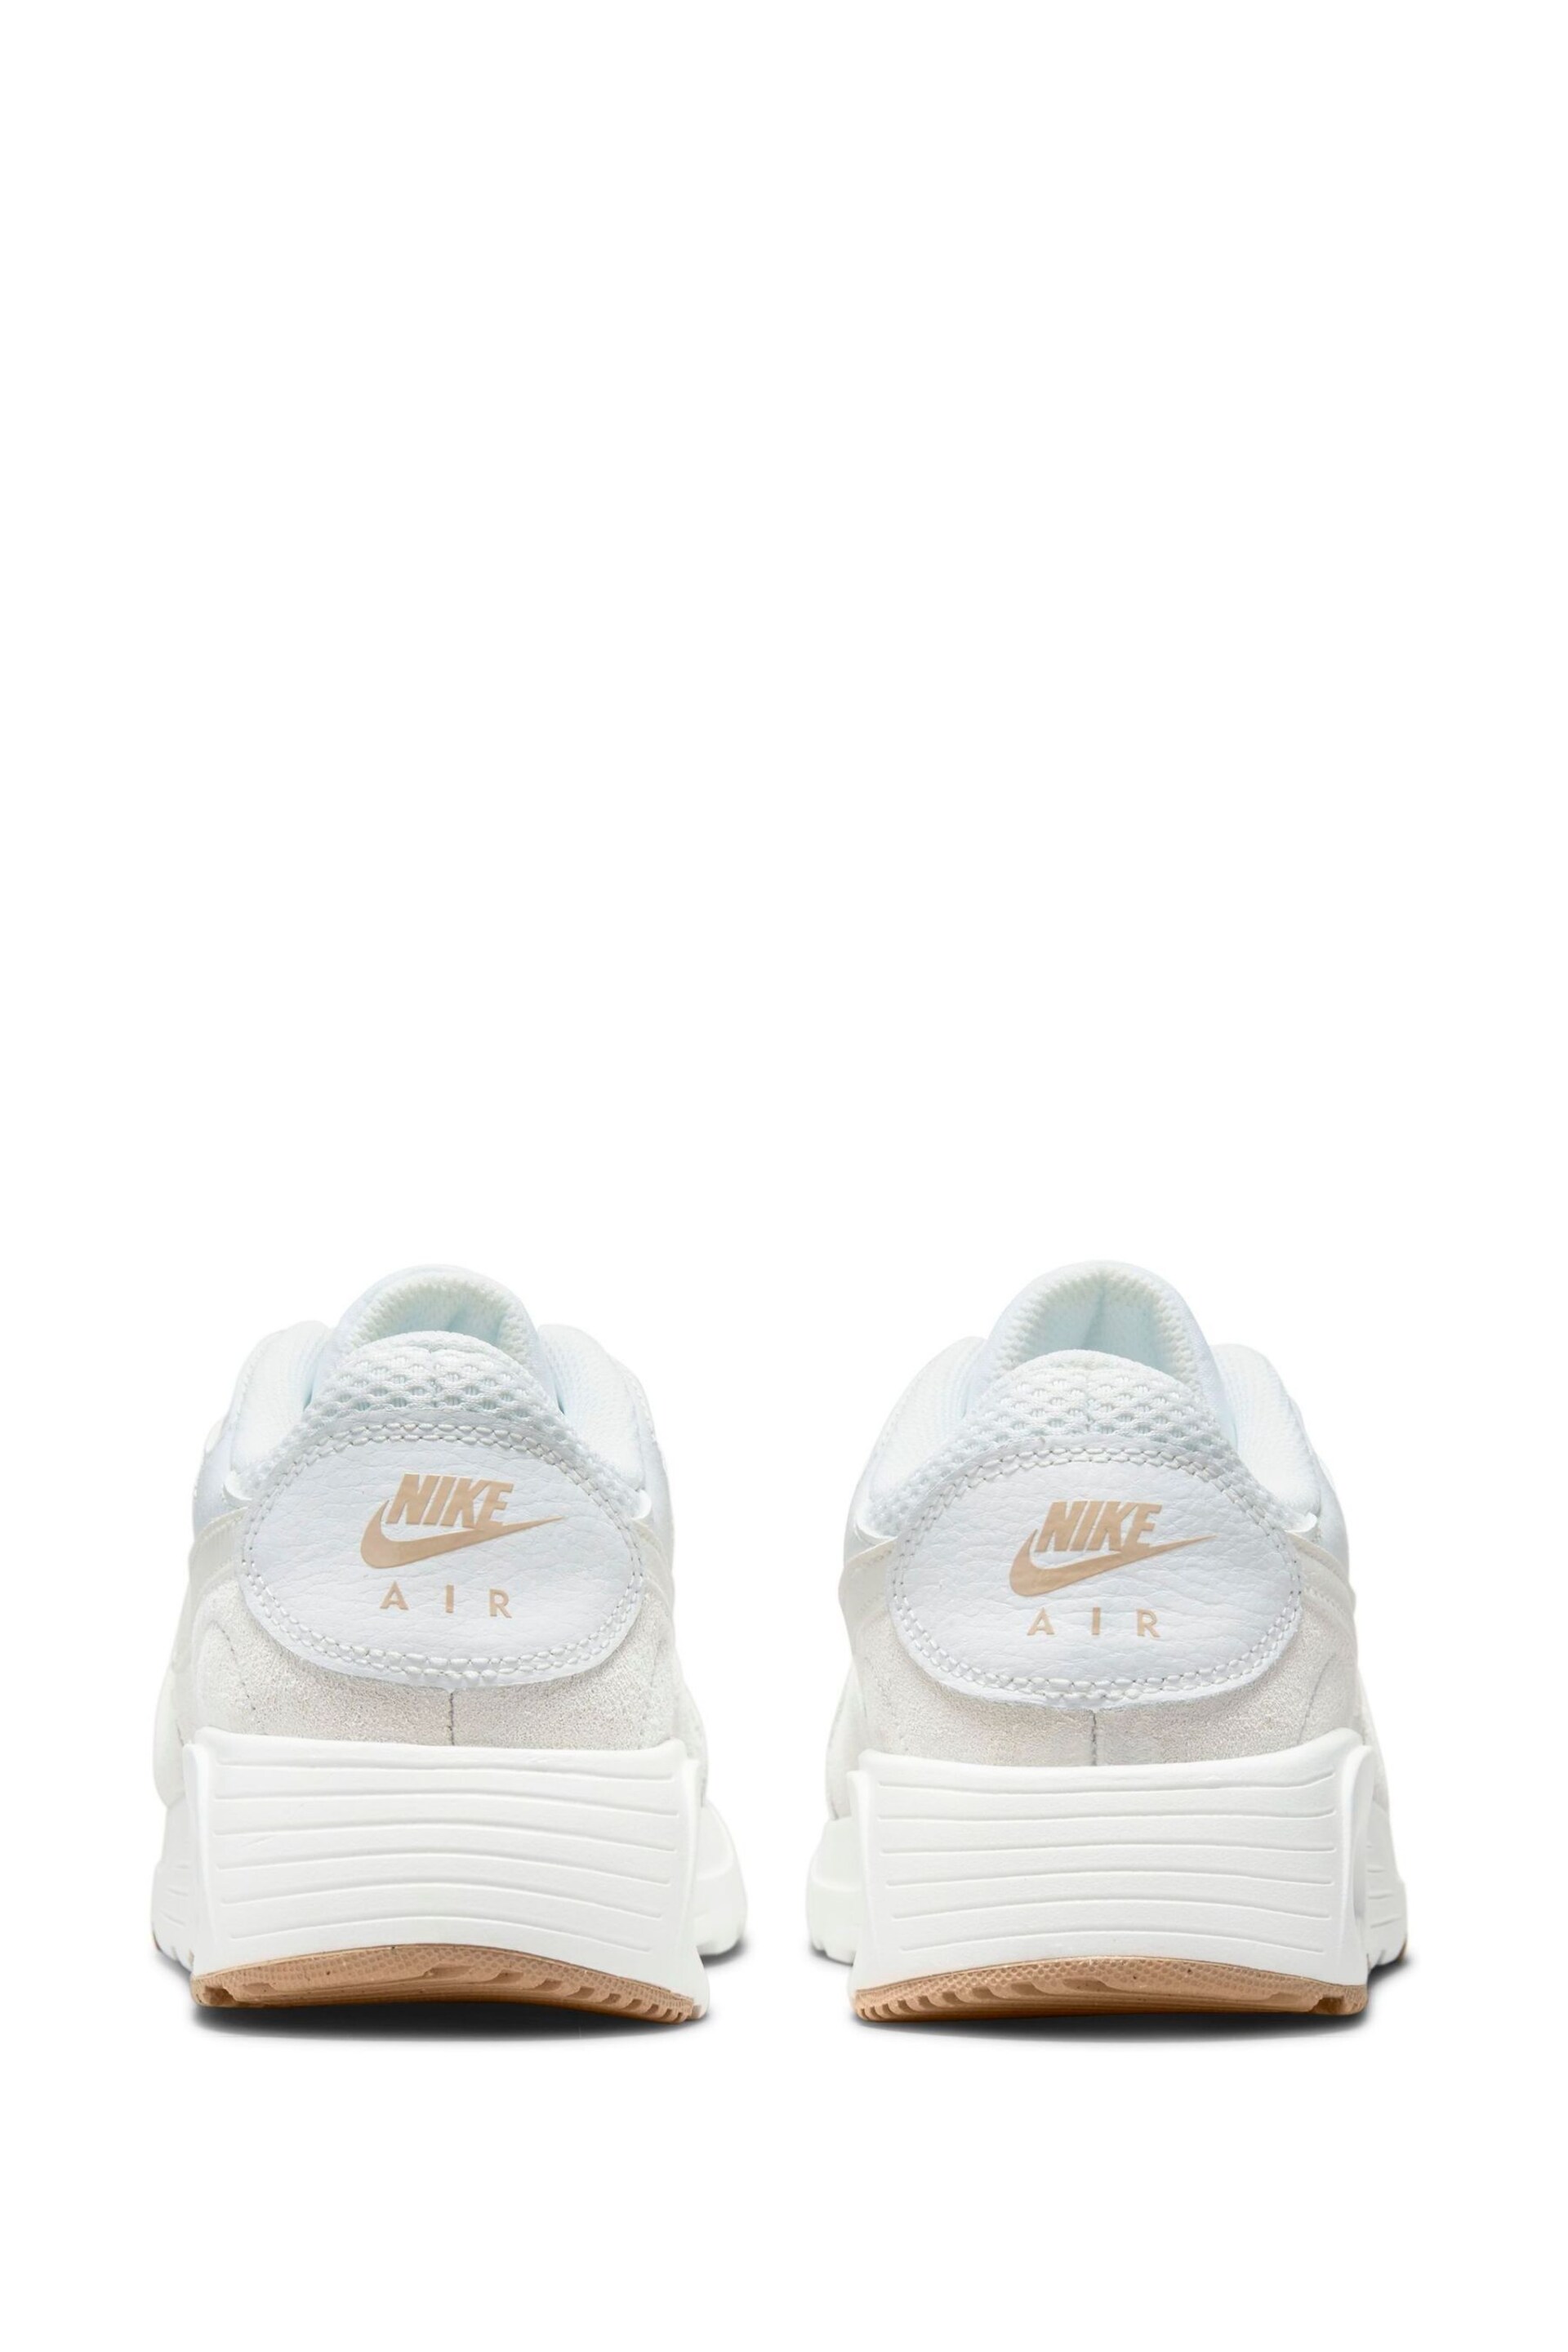 Nike White Air Max SC Trainers - Image 5 of 9